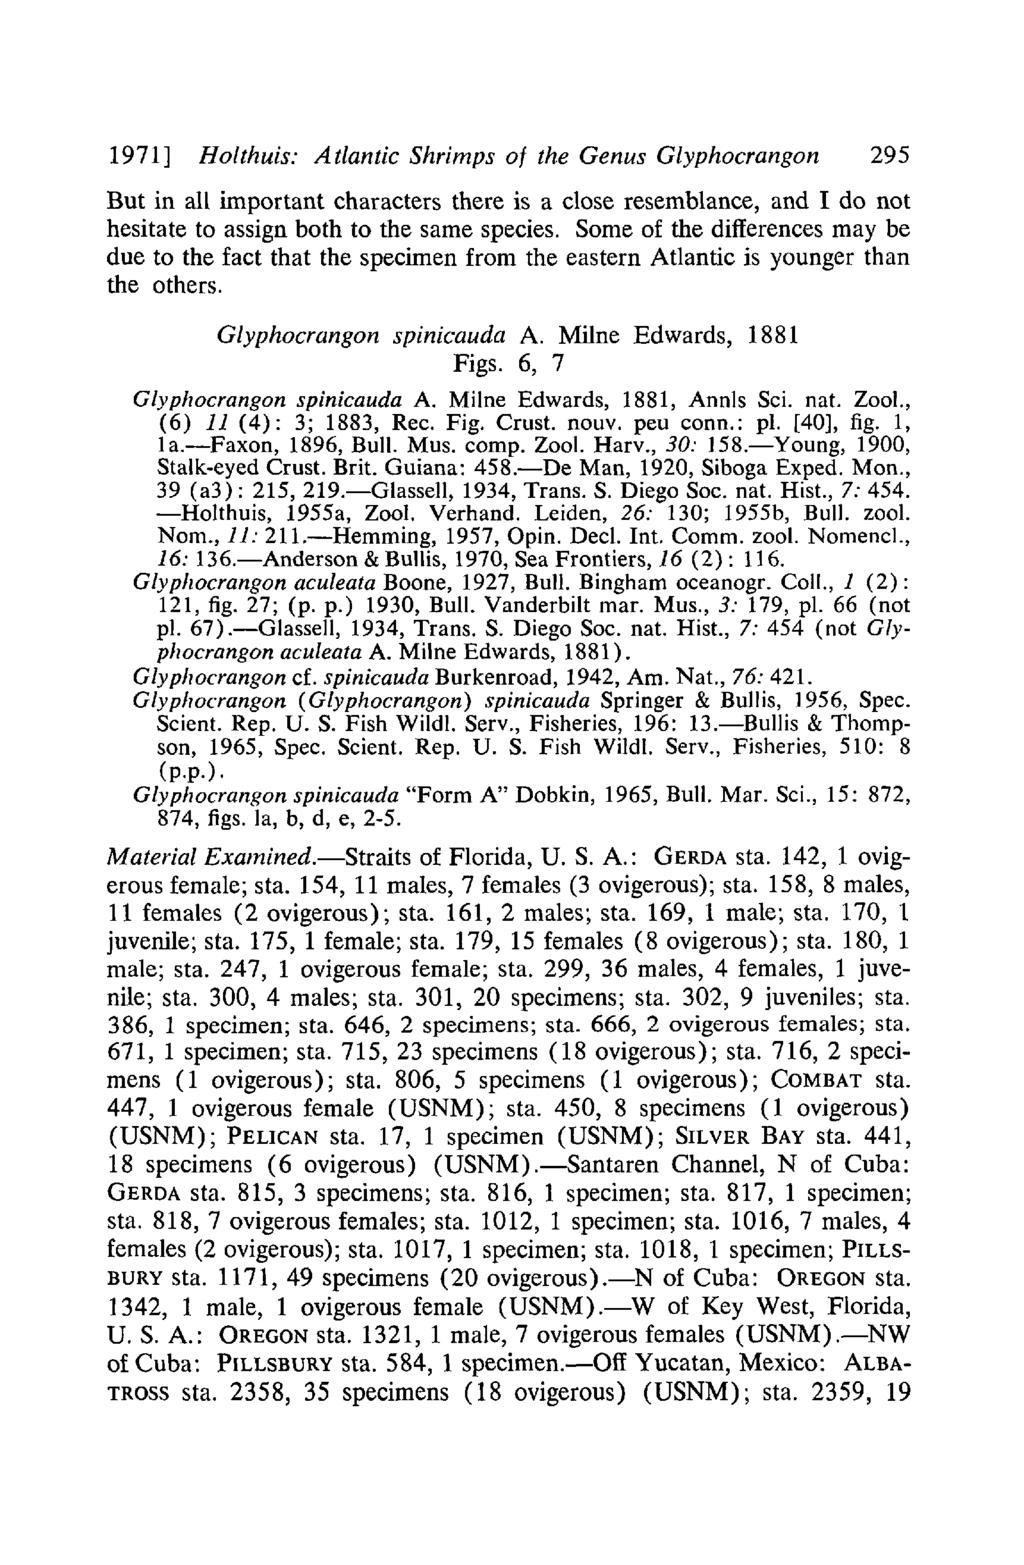 1971] Holthuis: Atlantic Shrimps of the Genus Glyphocrangon 295 But in all important characters there is a close resemblance, and I do not hesitate to assign both to the same species.